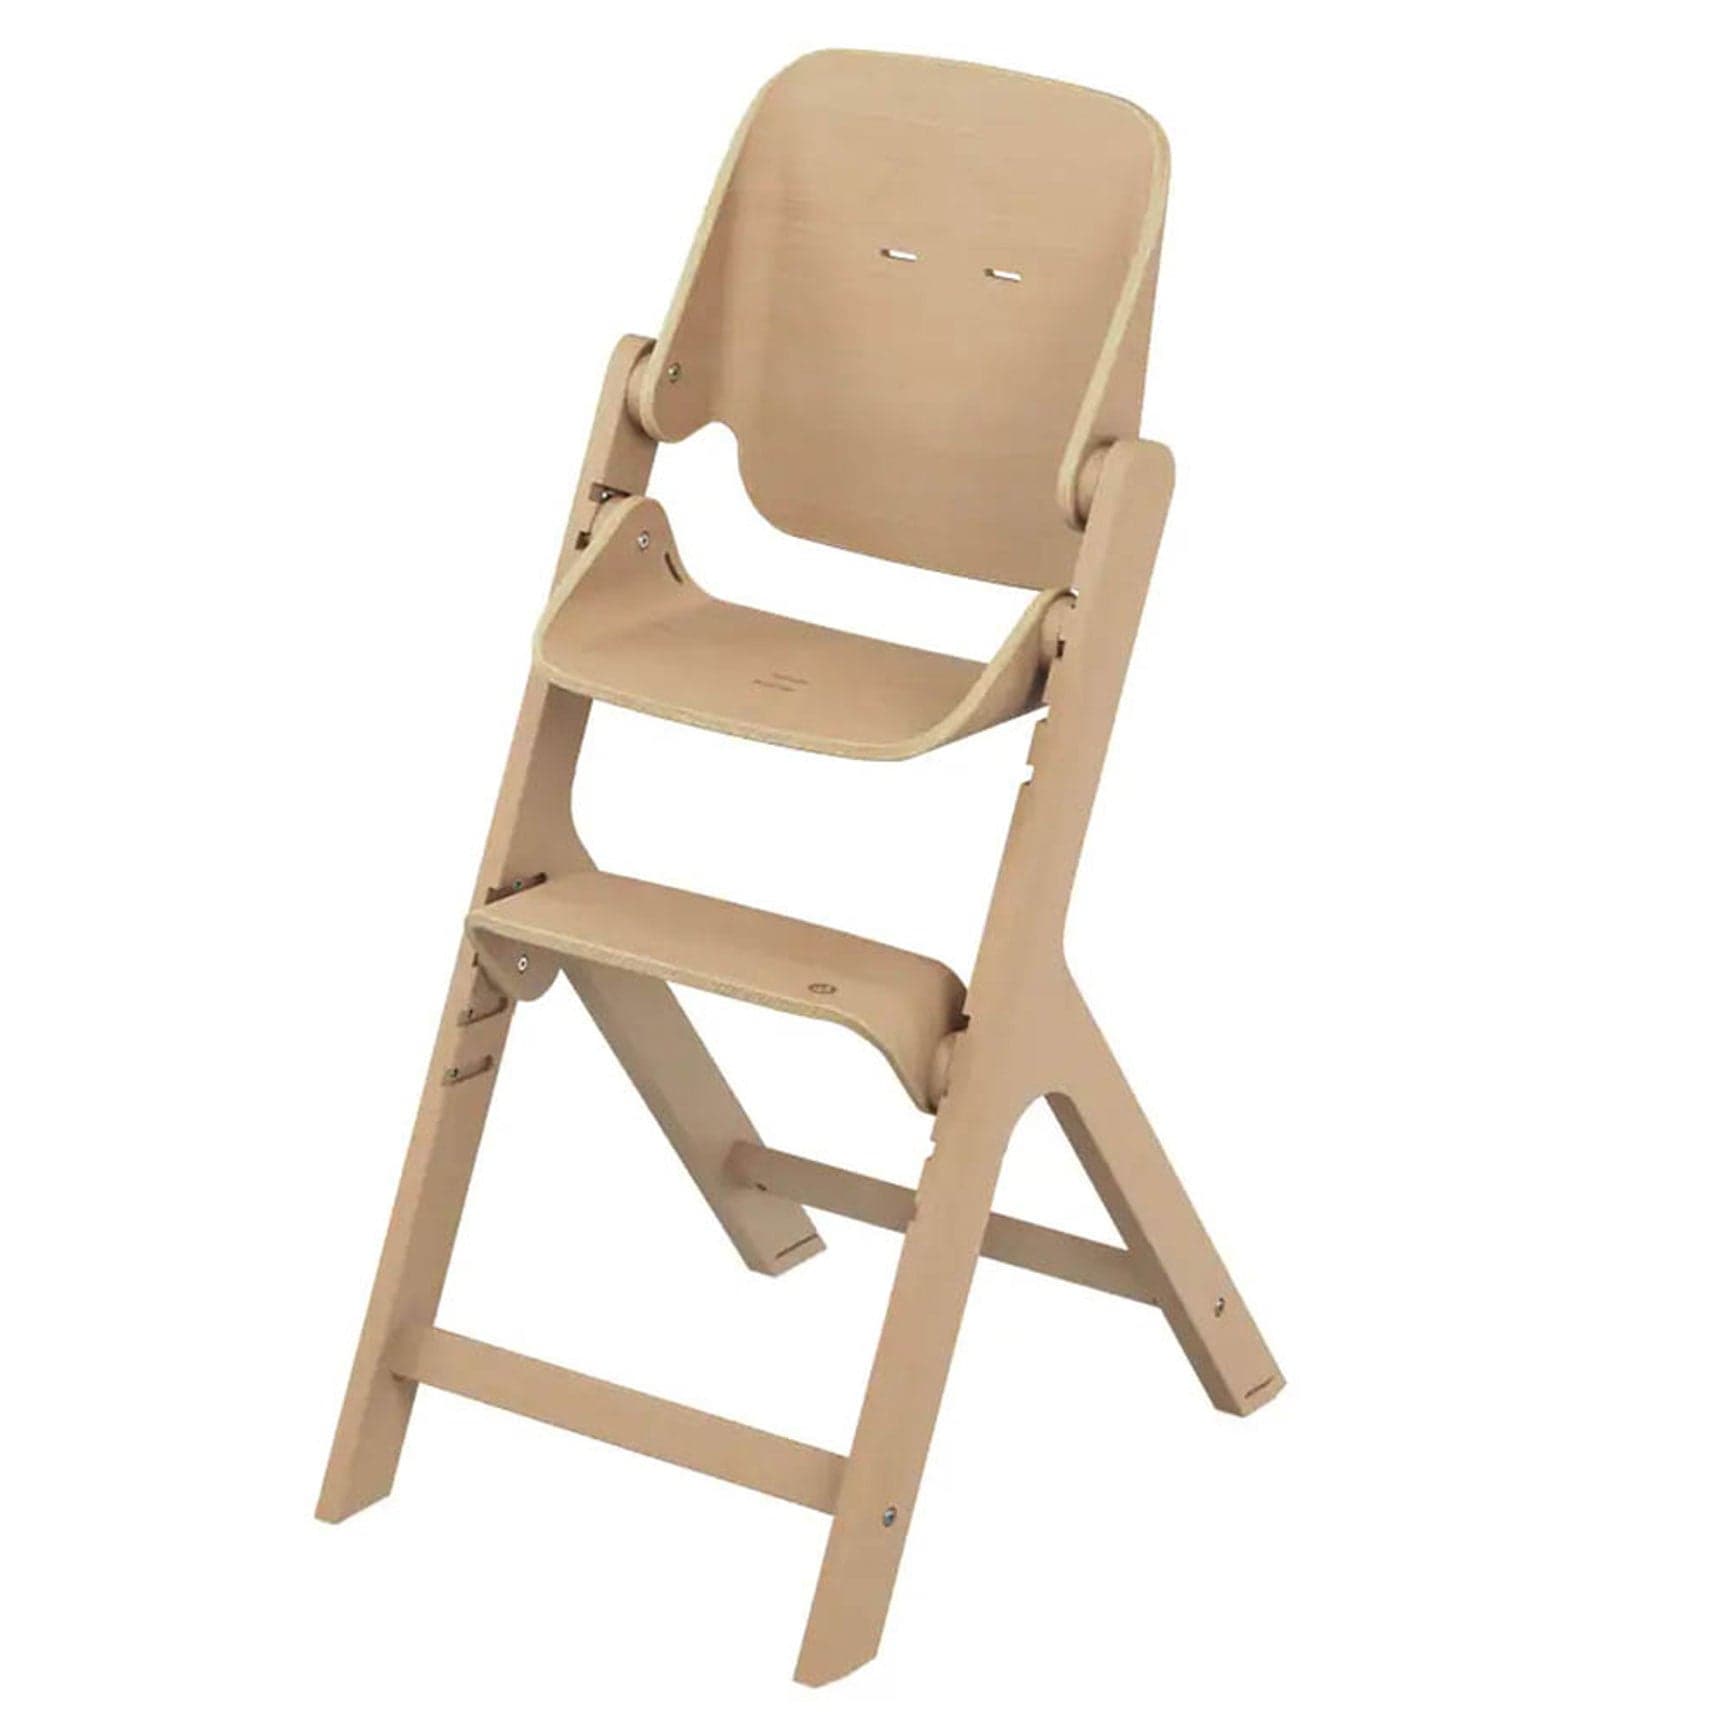 Maxi-Cosi Nesta Highchair in Natural Baby Highchairs 2719014110 3220660340361